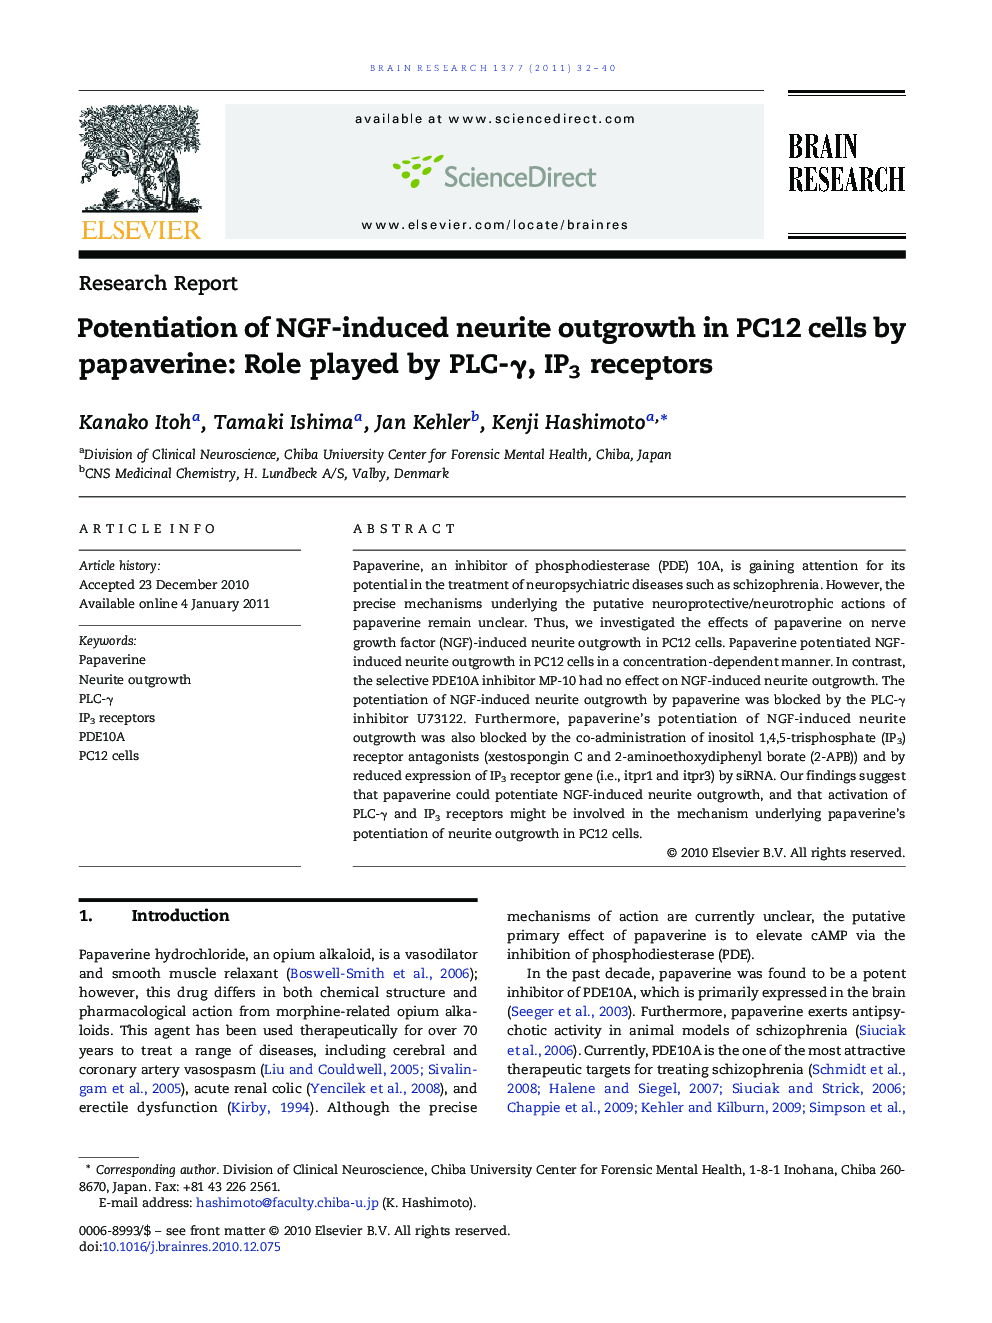 Potentiation of NGF-induced neurite outgrowth in PC12 cells by papaverine: Role played by PLC-γ, IP3 receptors